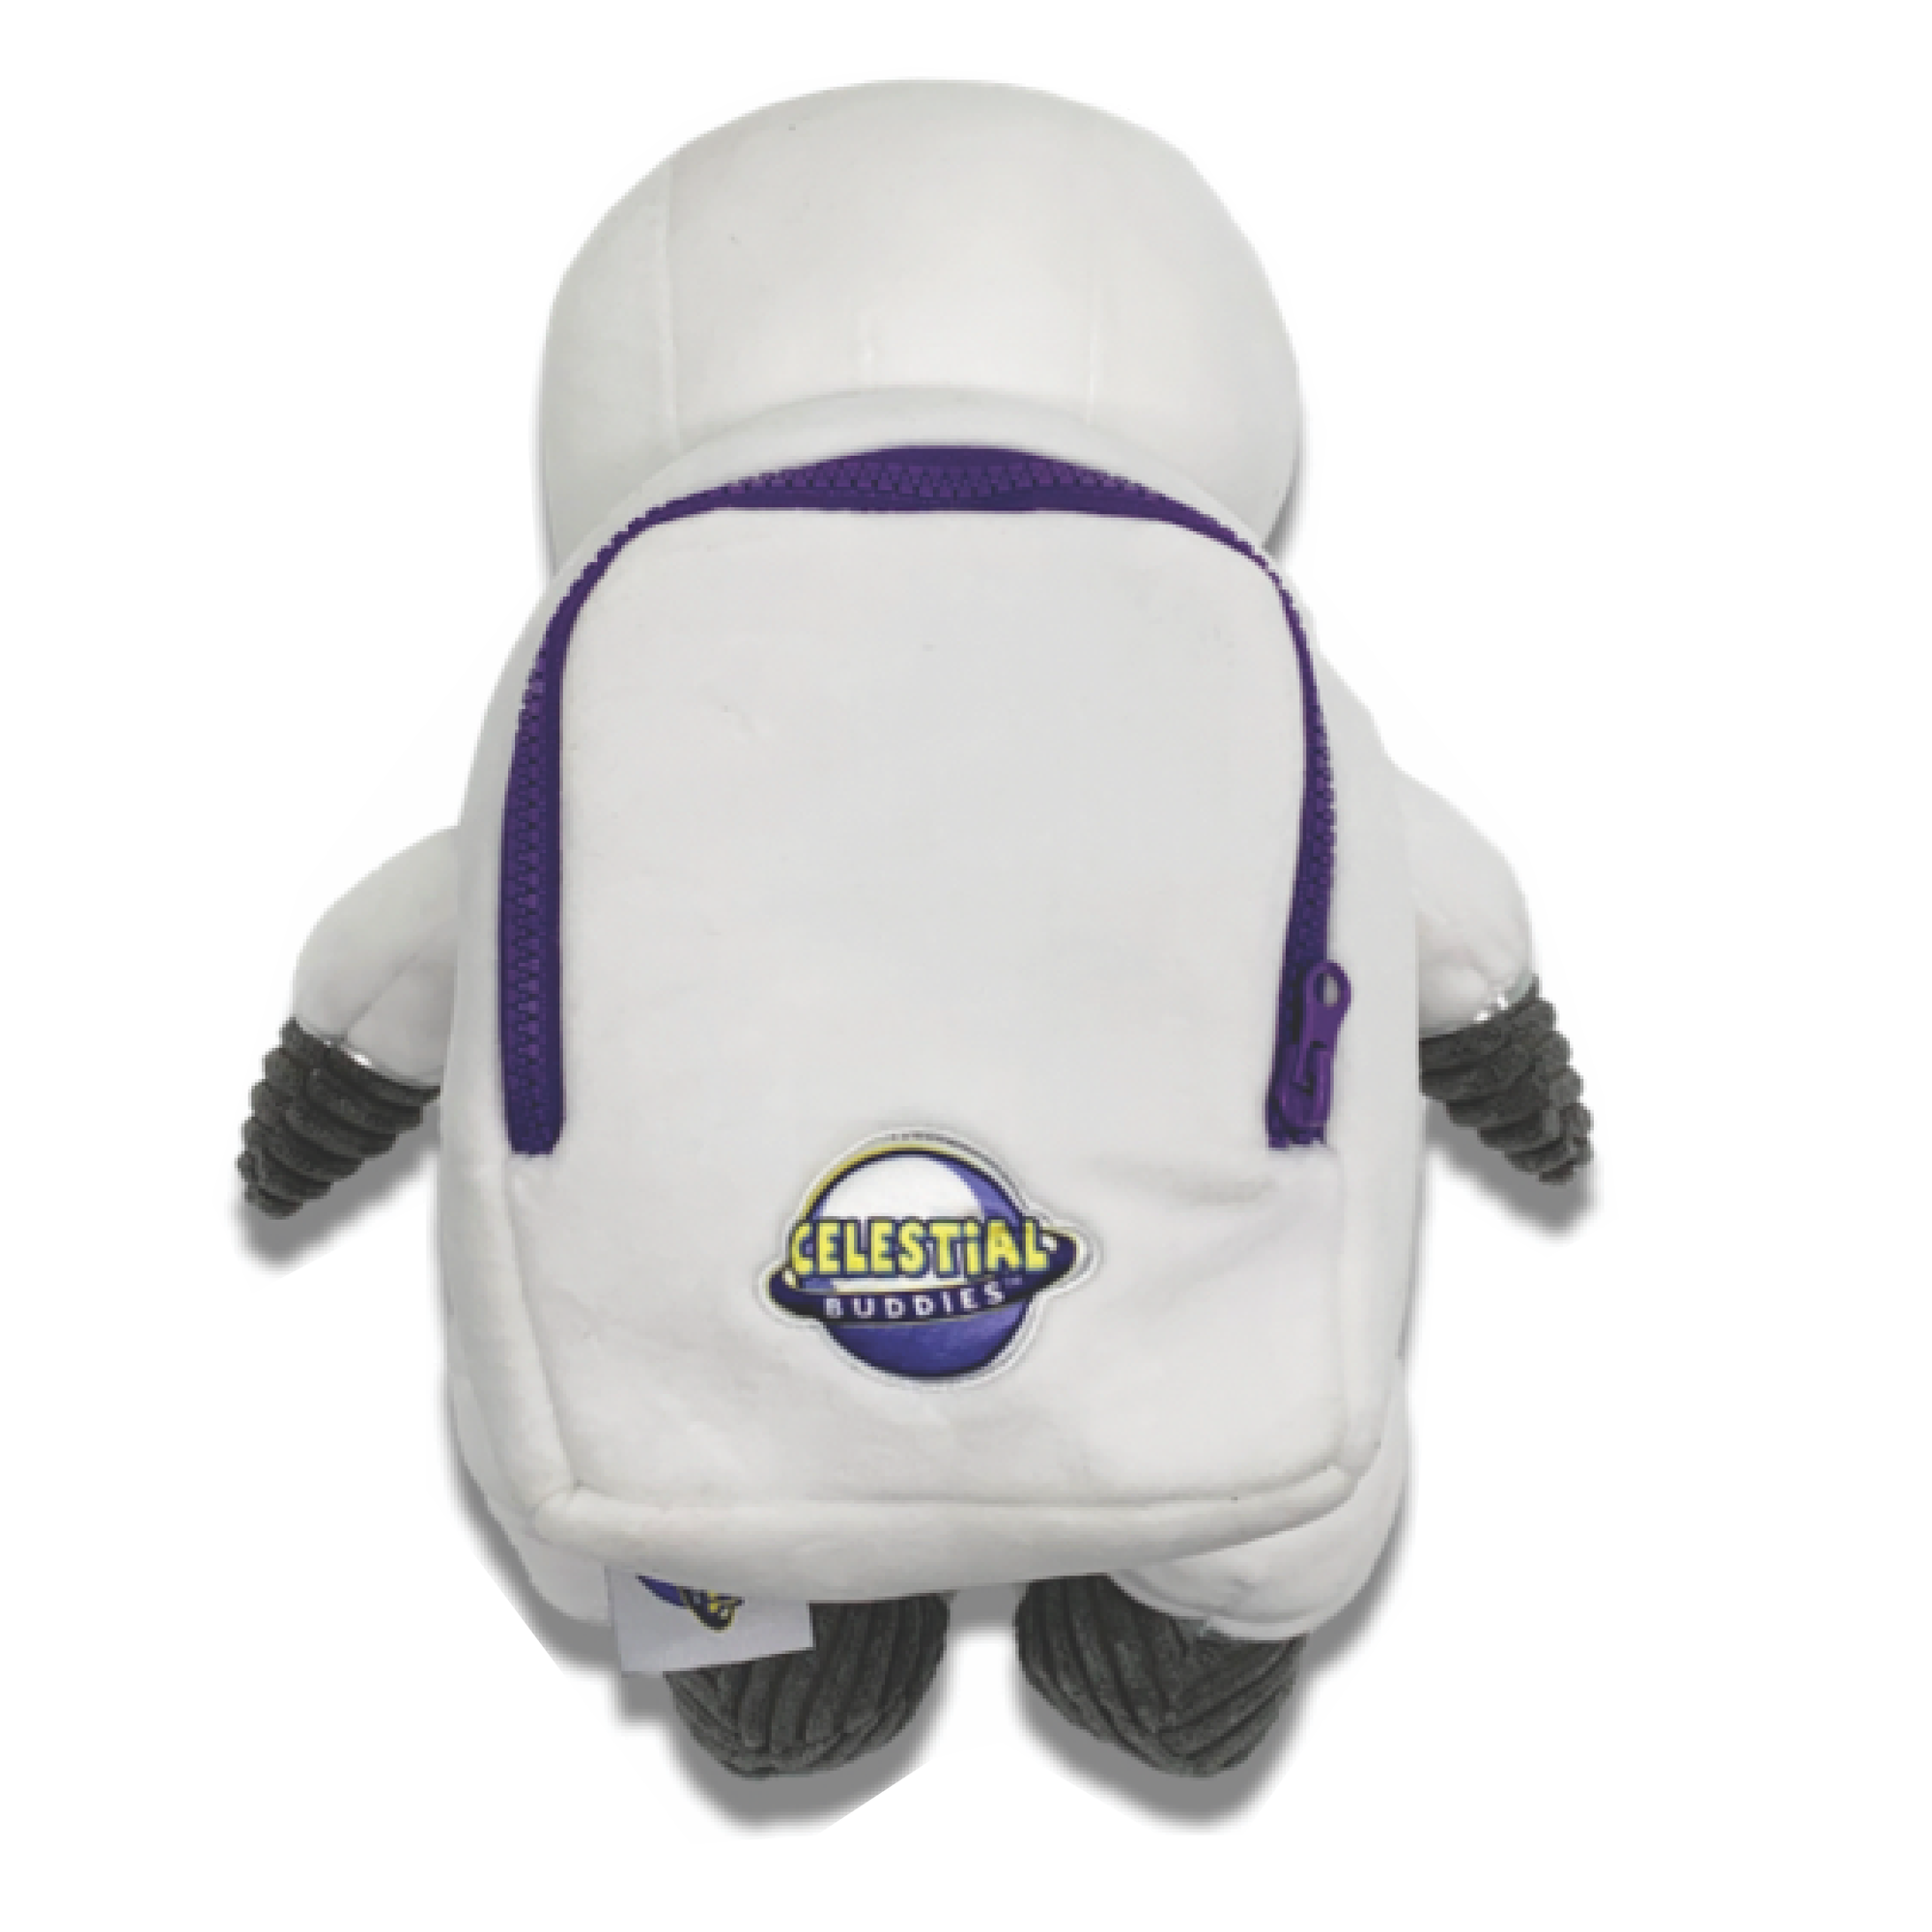 Front view of the AstroBuddy in a sitting position.